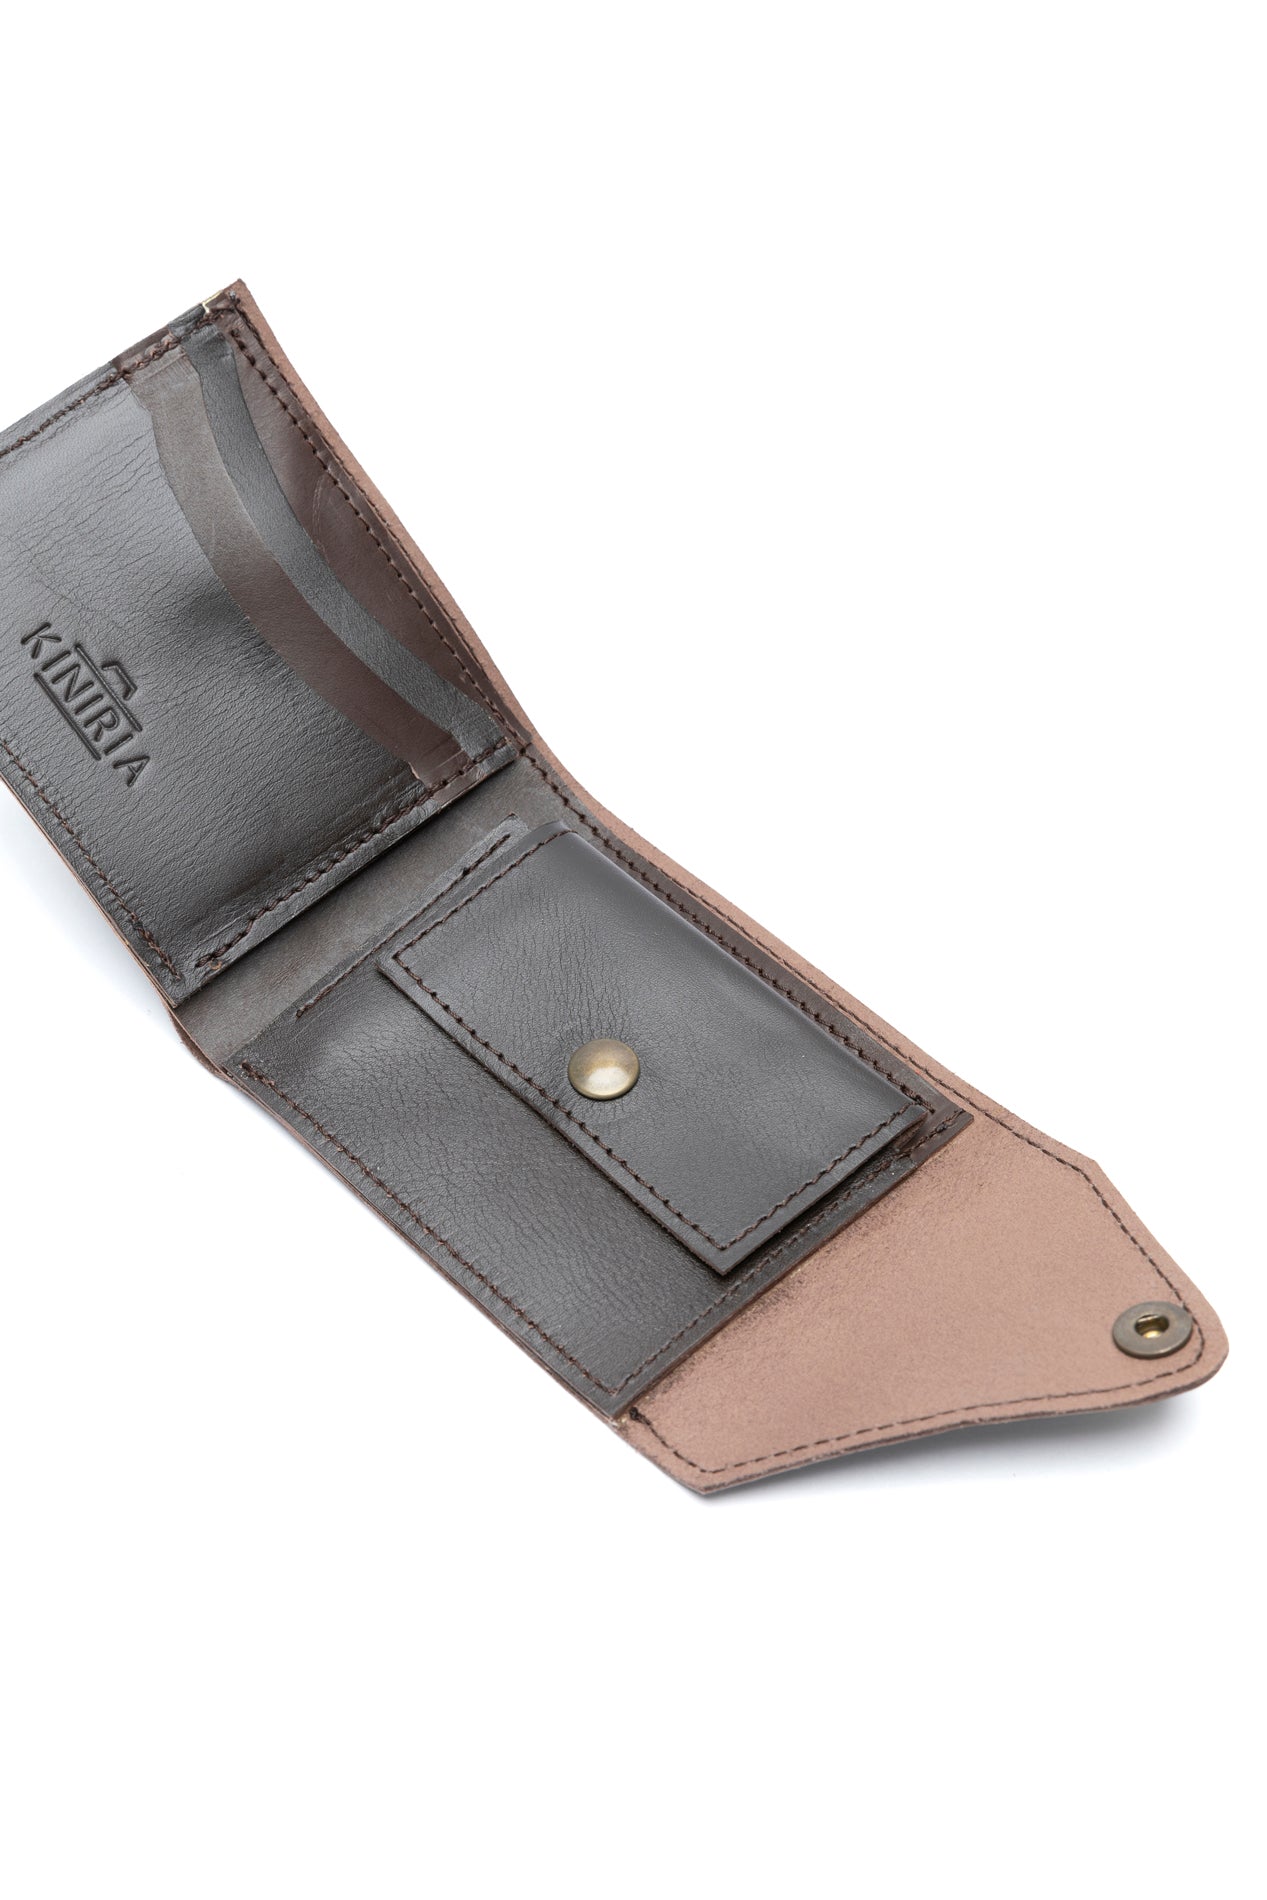 AMERICAN WALLET WITH BROHE | Chocolate